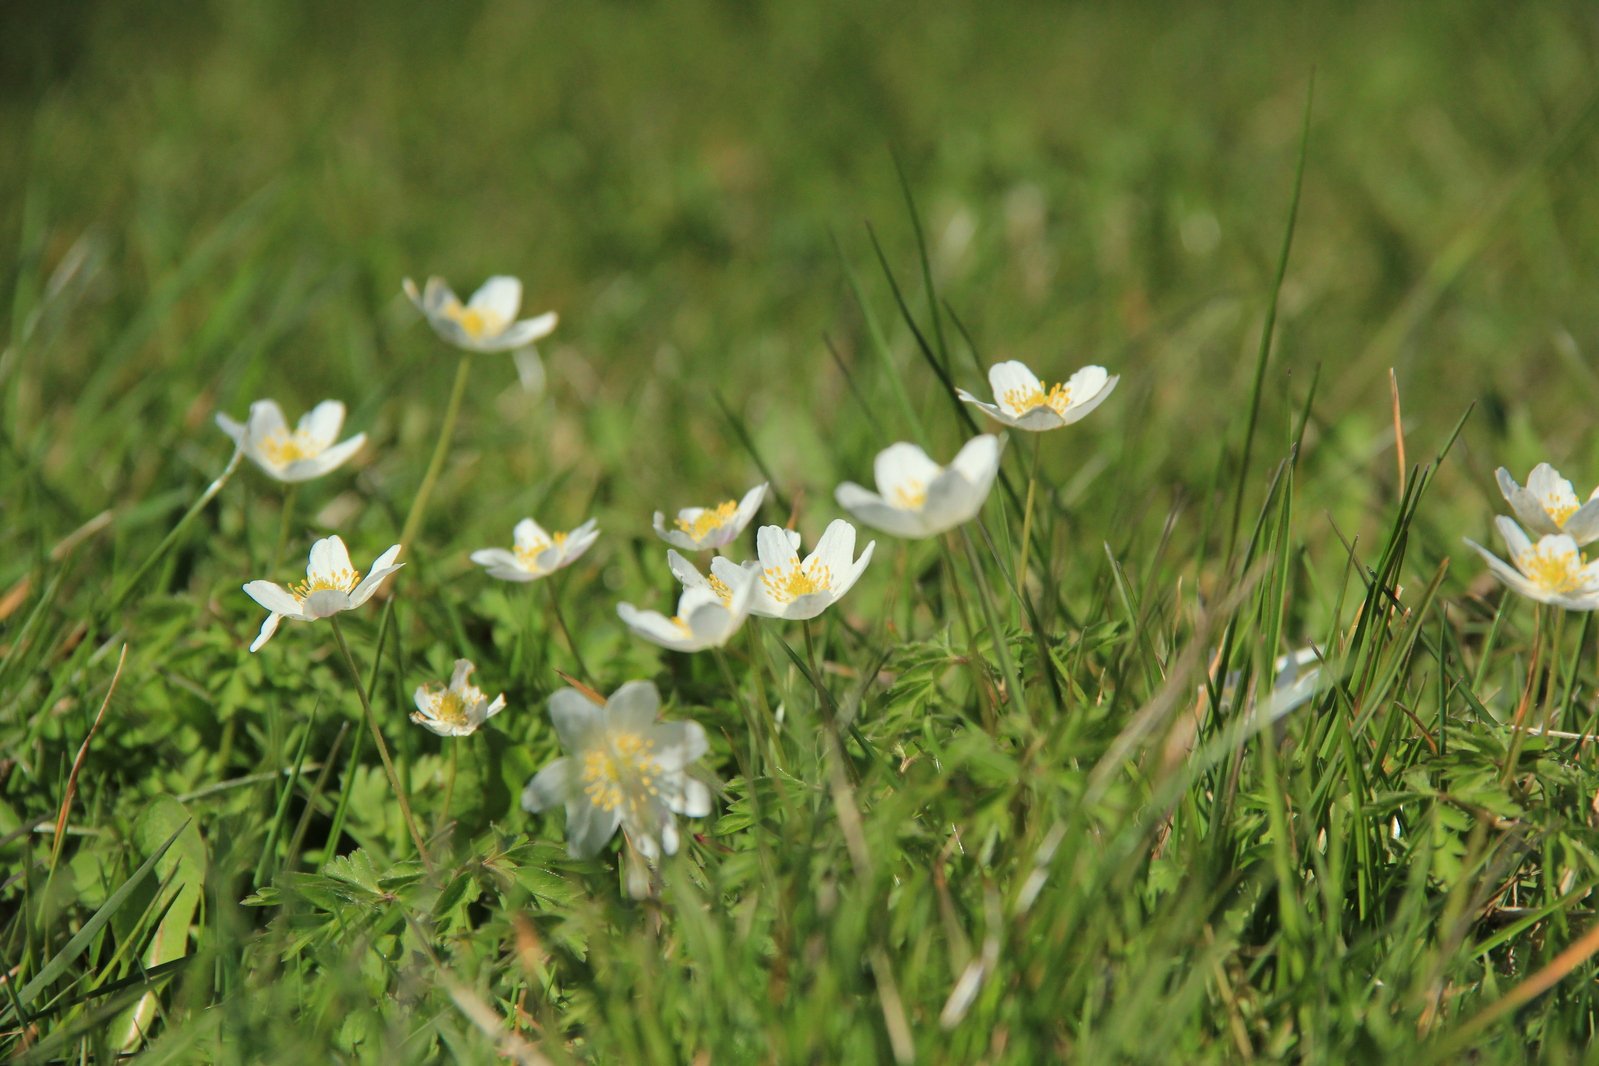 a small group of small white flowers growing in a field